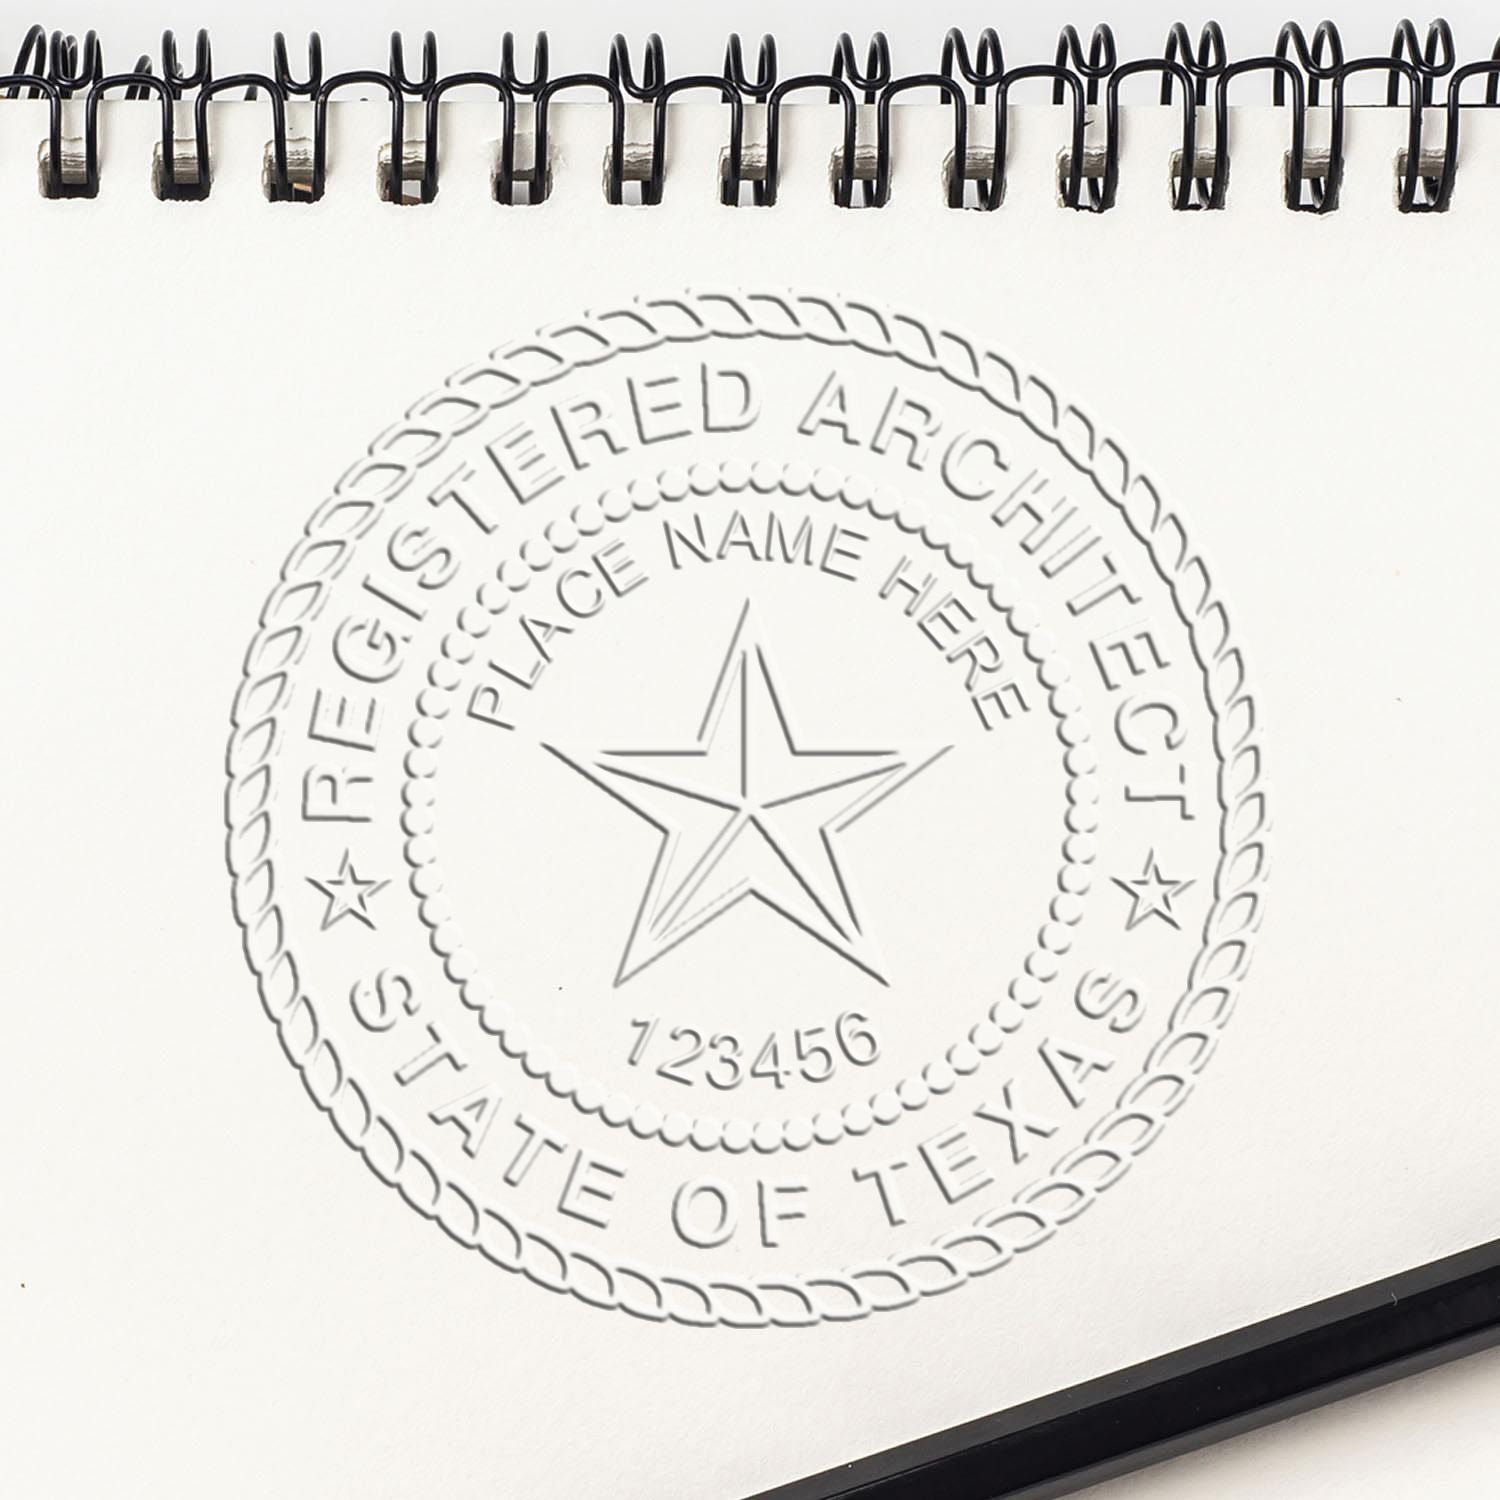 A lifestyle photo showing a stamped image of the Texas Desk Architect Embossing Seal on a piece of paper